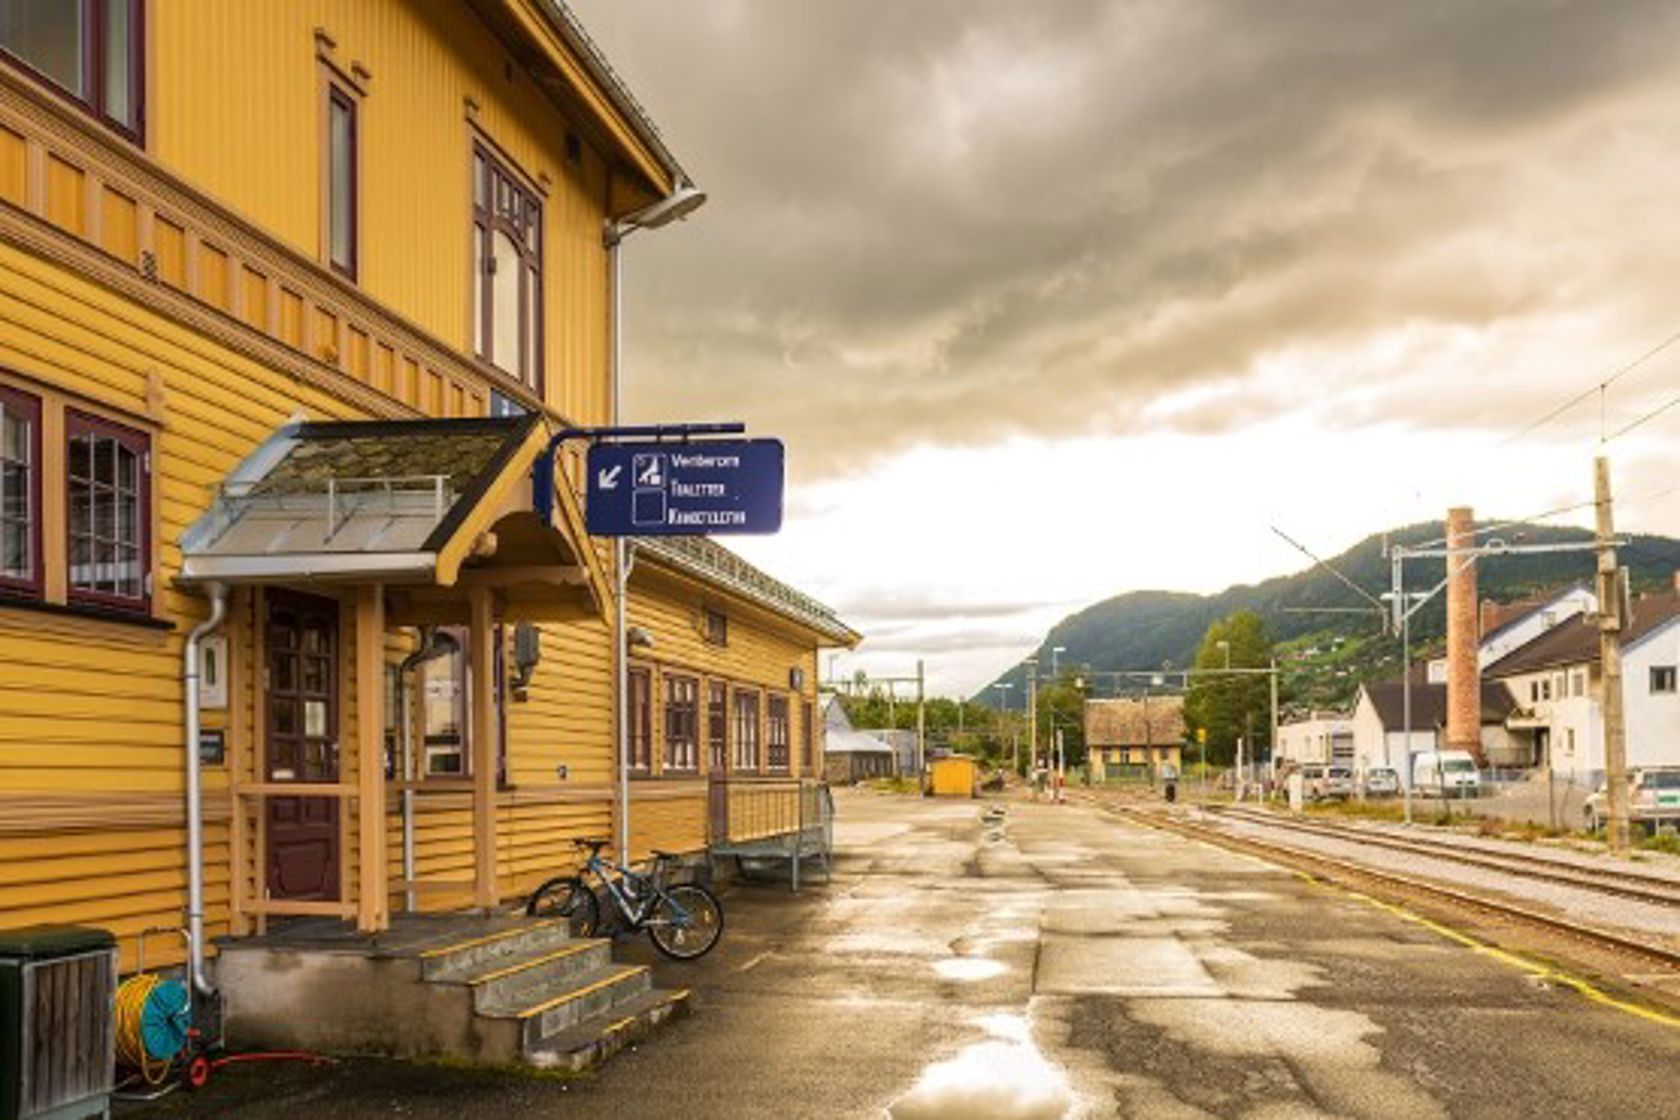 Exterior view of Ål station